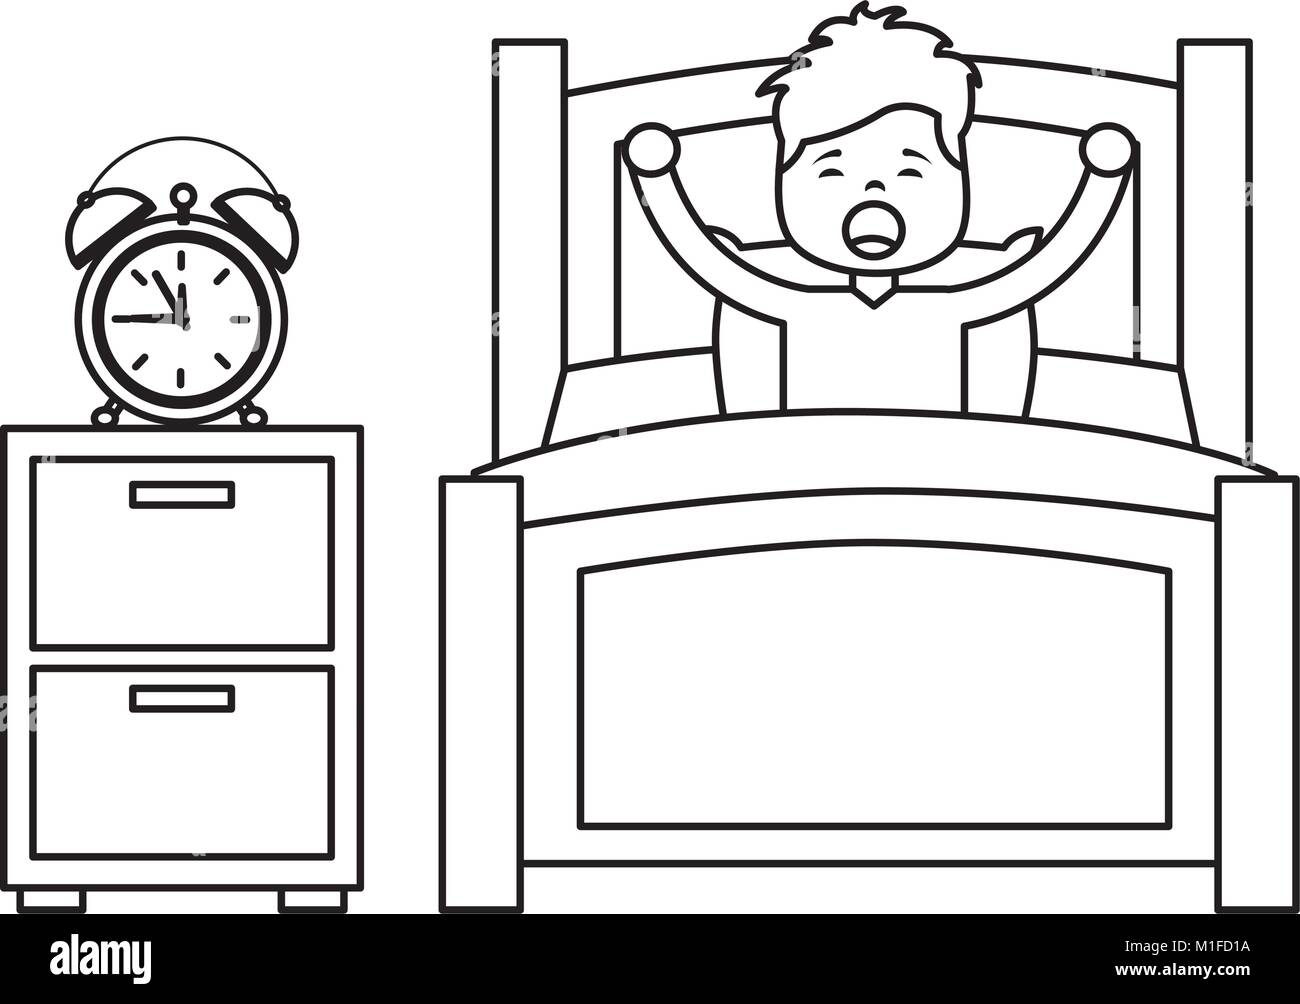 boy wake up stretching in wooden bed with bedside table clock Stock Vector